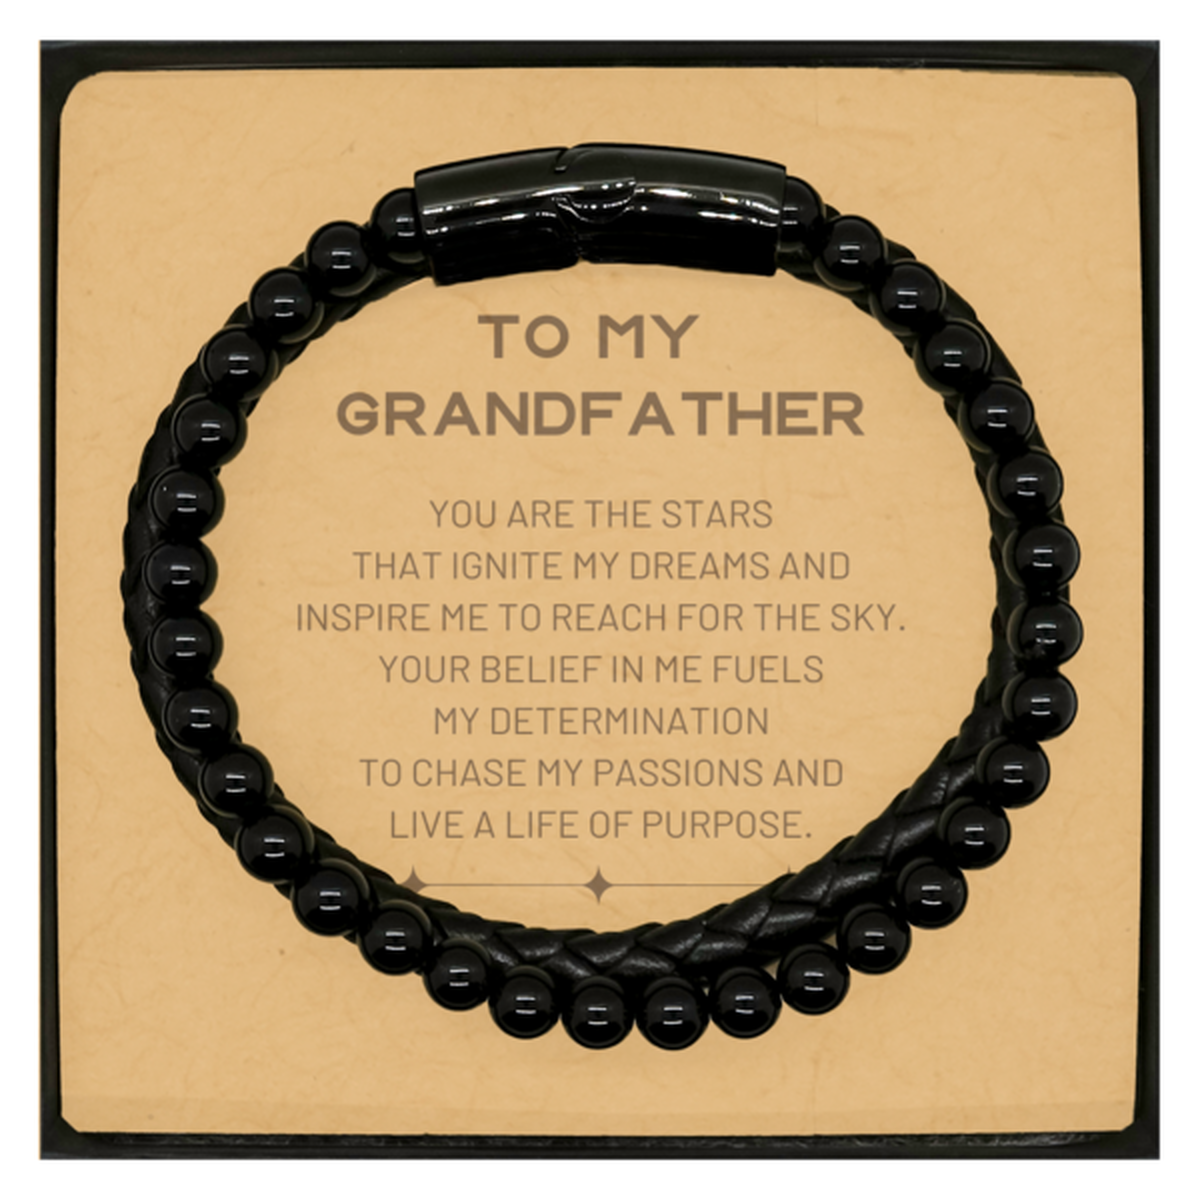 To My Grandfather Stone Leather Bracelets, You are the stars that ignite my dreams and inspire me to reach for the sky, Birthday Christmas Unique Gifts For Grandfather, Thank You Gifts For Grandfather